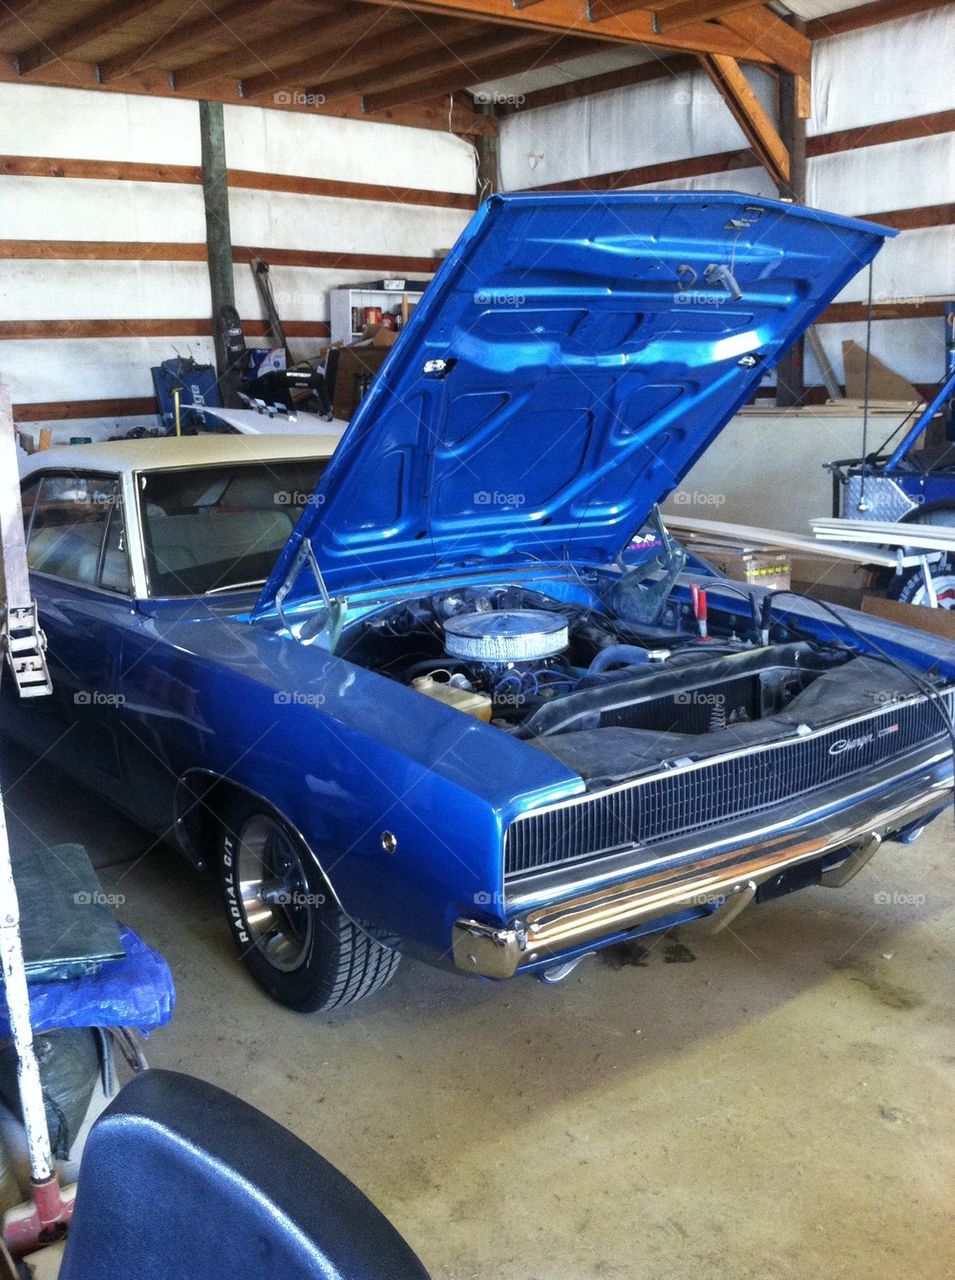 Working on the charger